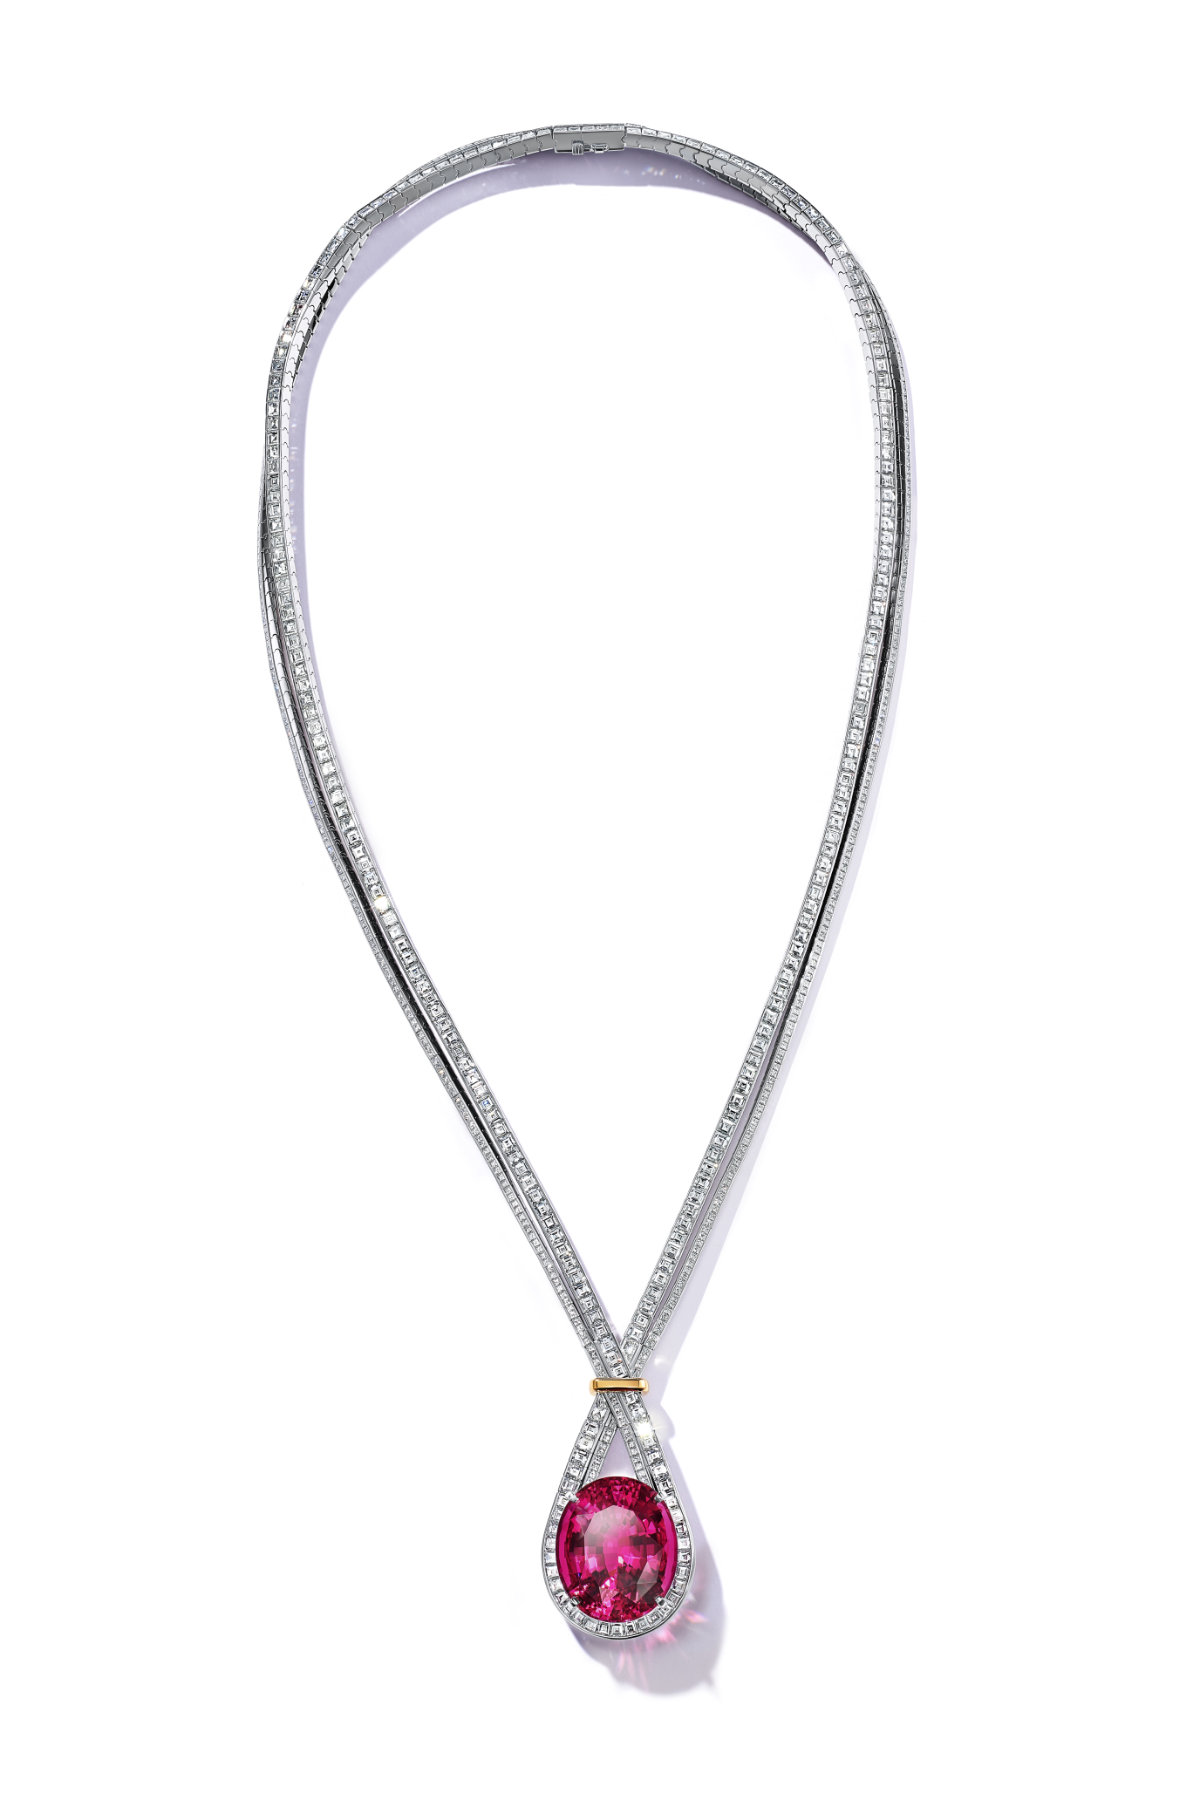 Tiffany & Co Ruby and Diamond Necklace, J.S. Fearnley